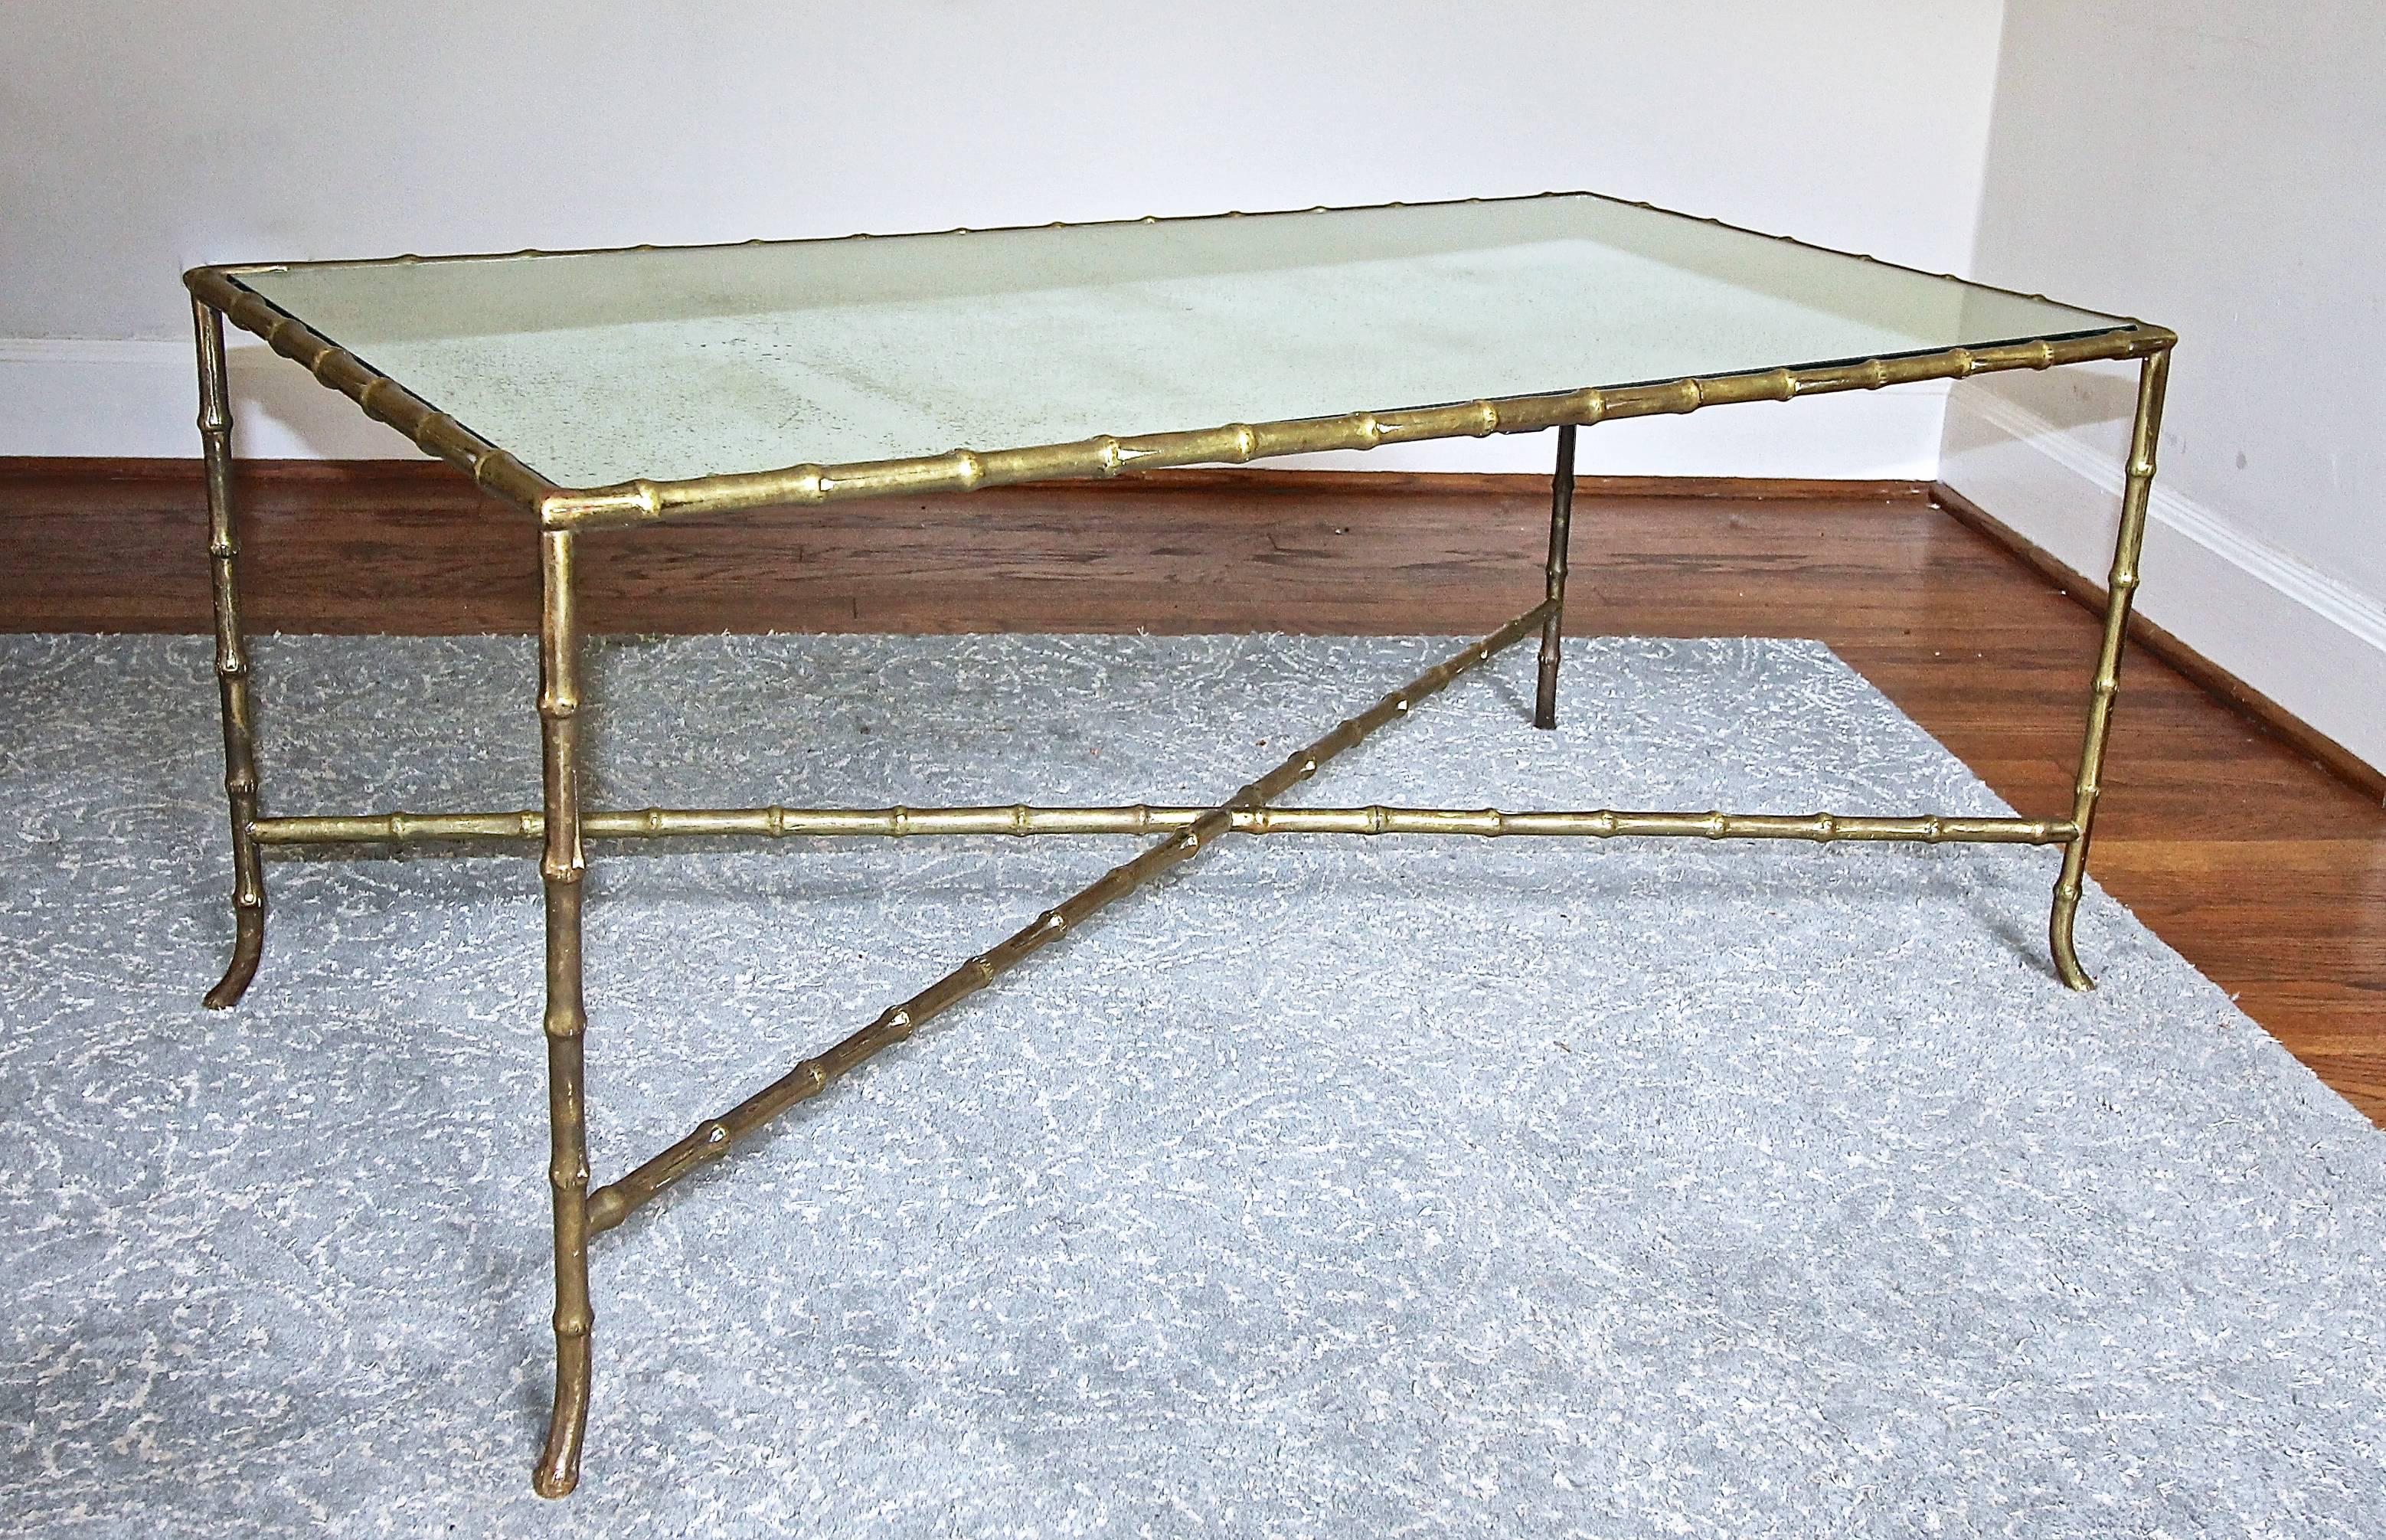 French faux bamboo bronze cocktail or coffee table with an "X" stretcher and inset antiqued mirrored top, in the style of Bagues. Beautiful warm patina to bronze. A high quality piece in a larger scale.

Measures: 41" L X